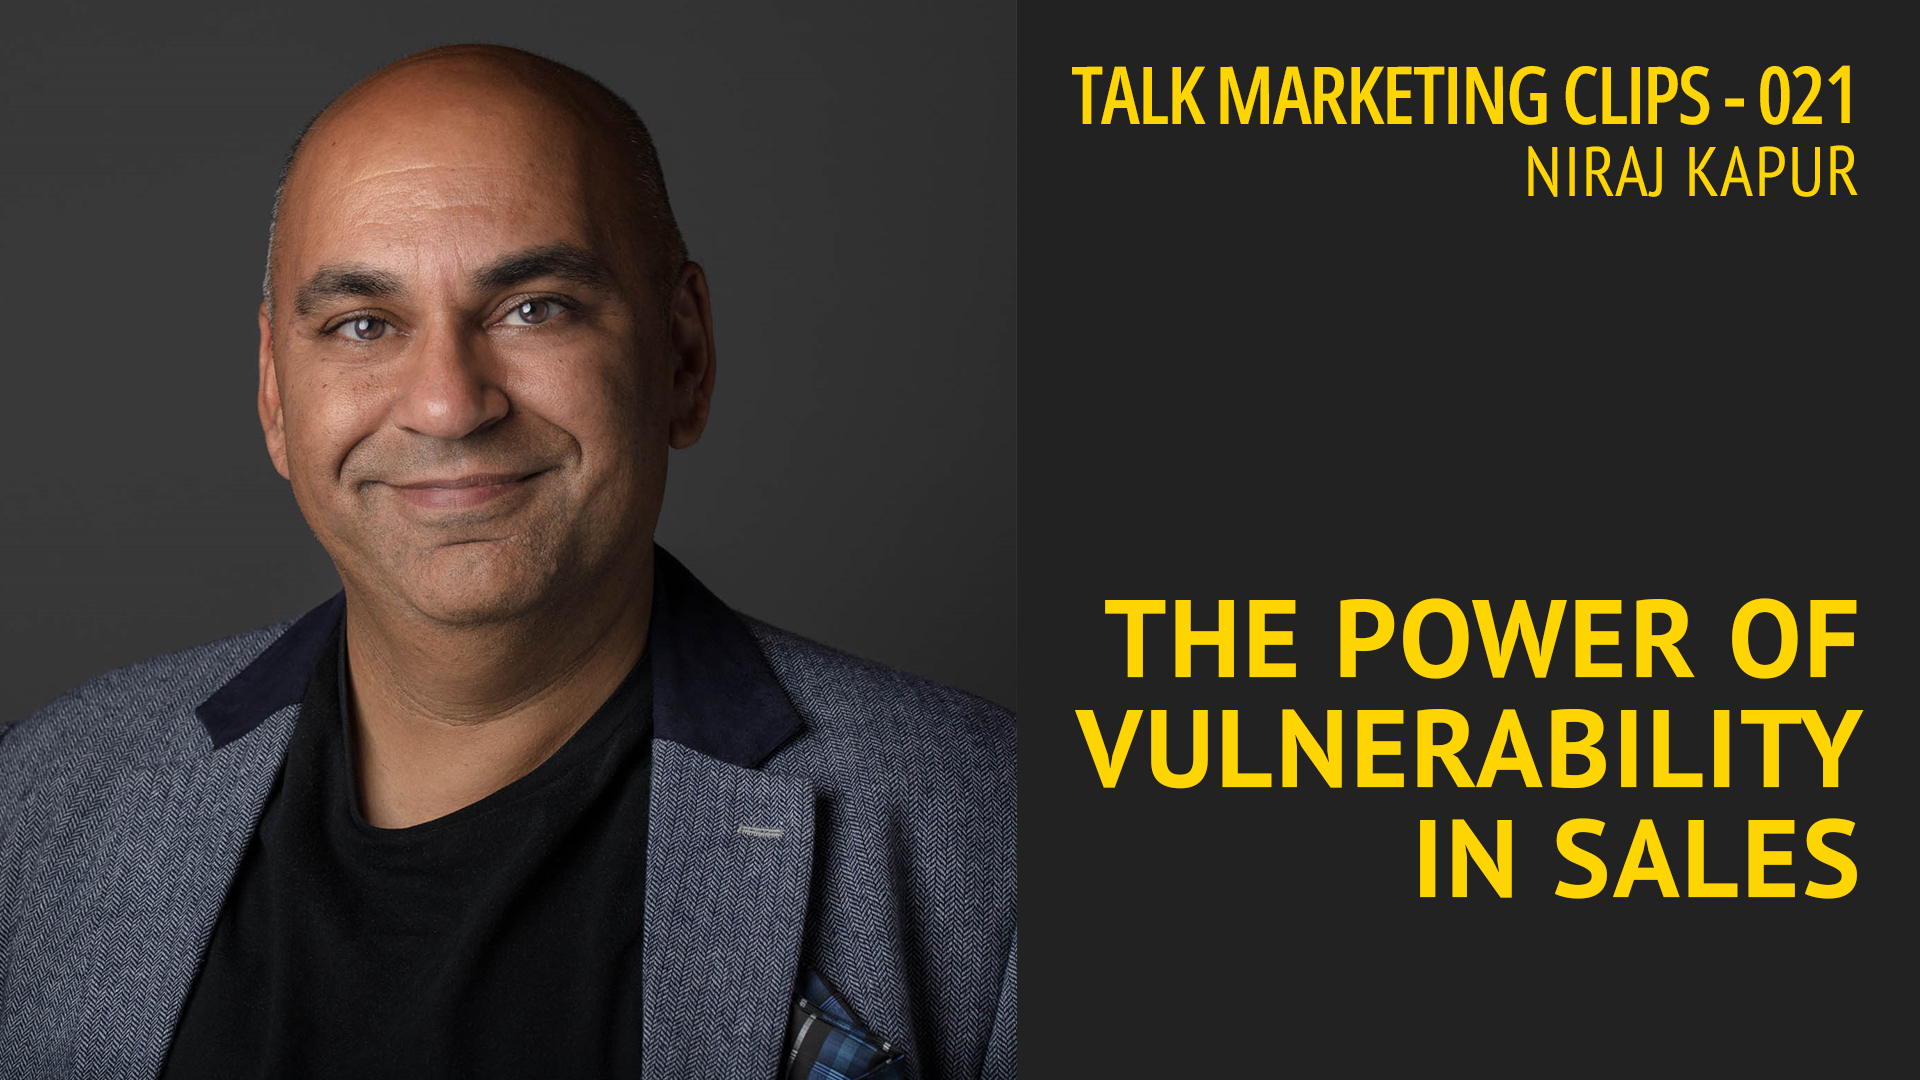 The power of vulnerability in sales – Effective Marketing Clips 21